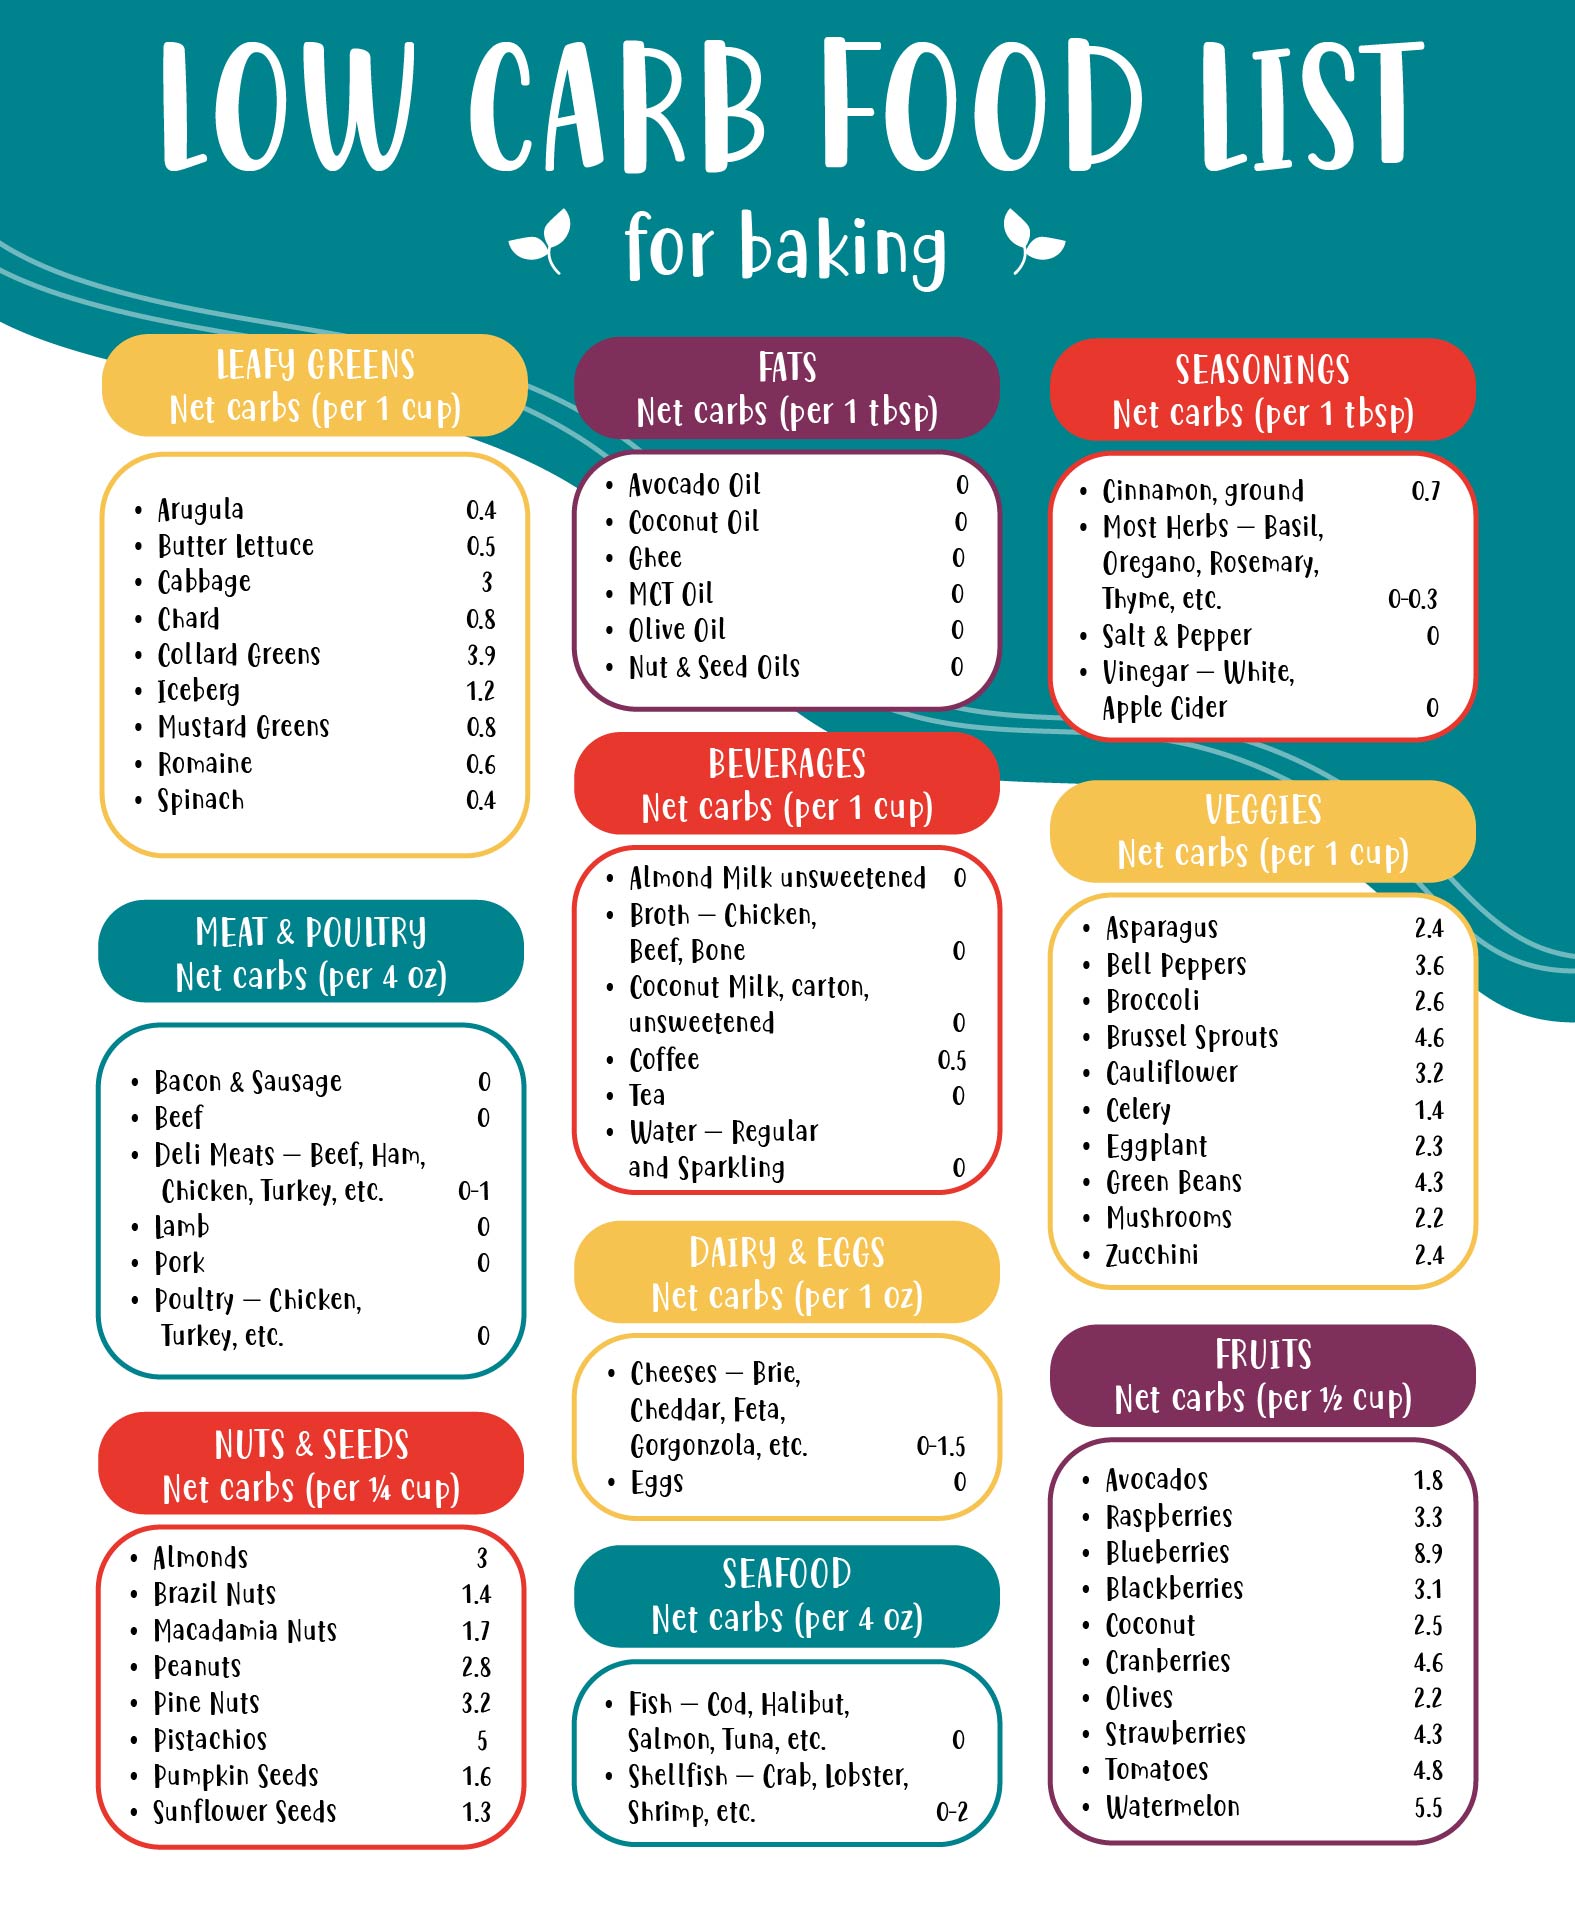 Low Carb Food List Printable For Baking